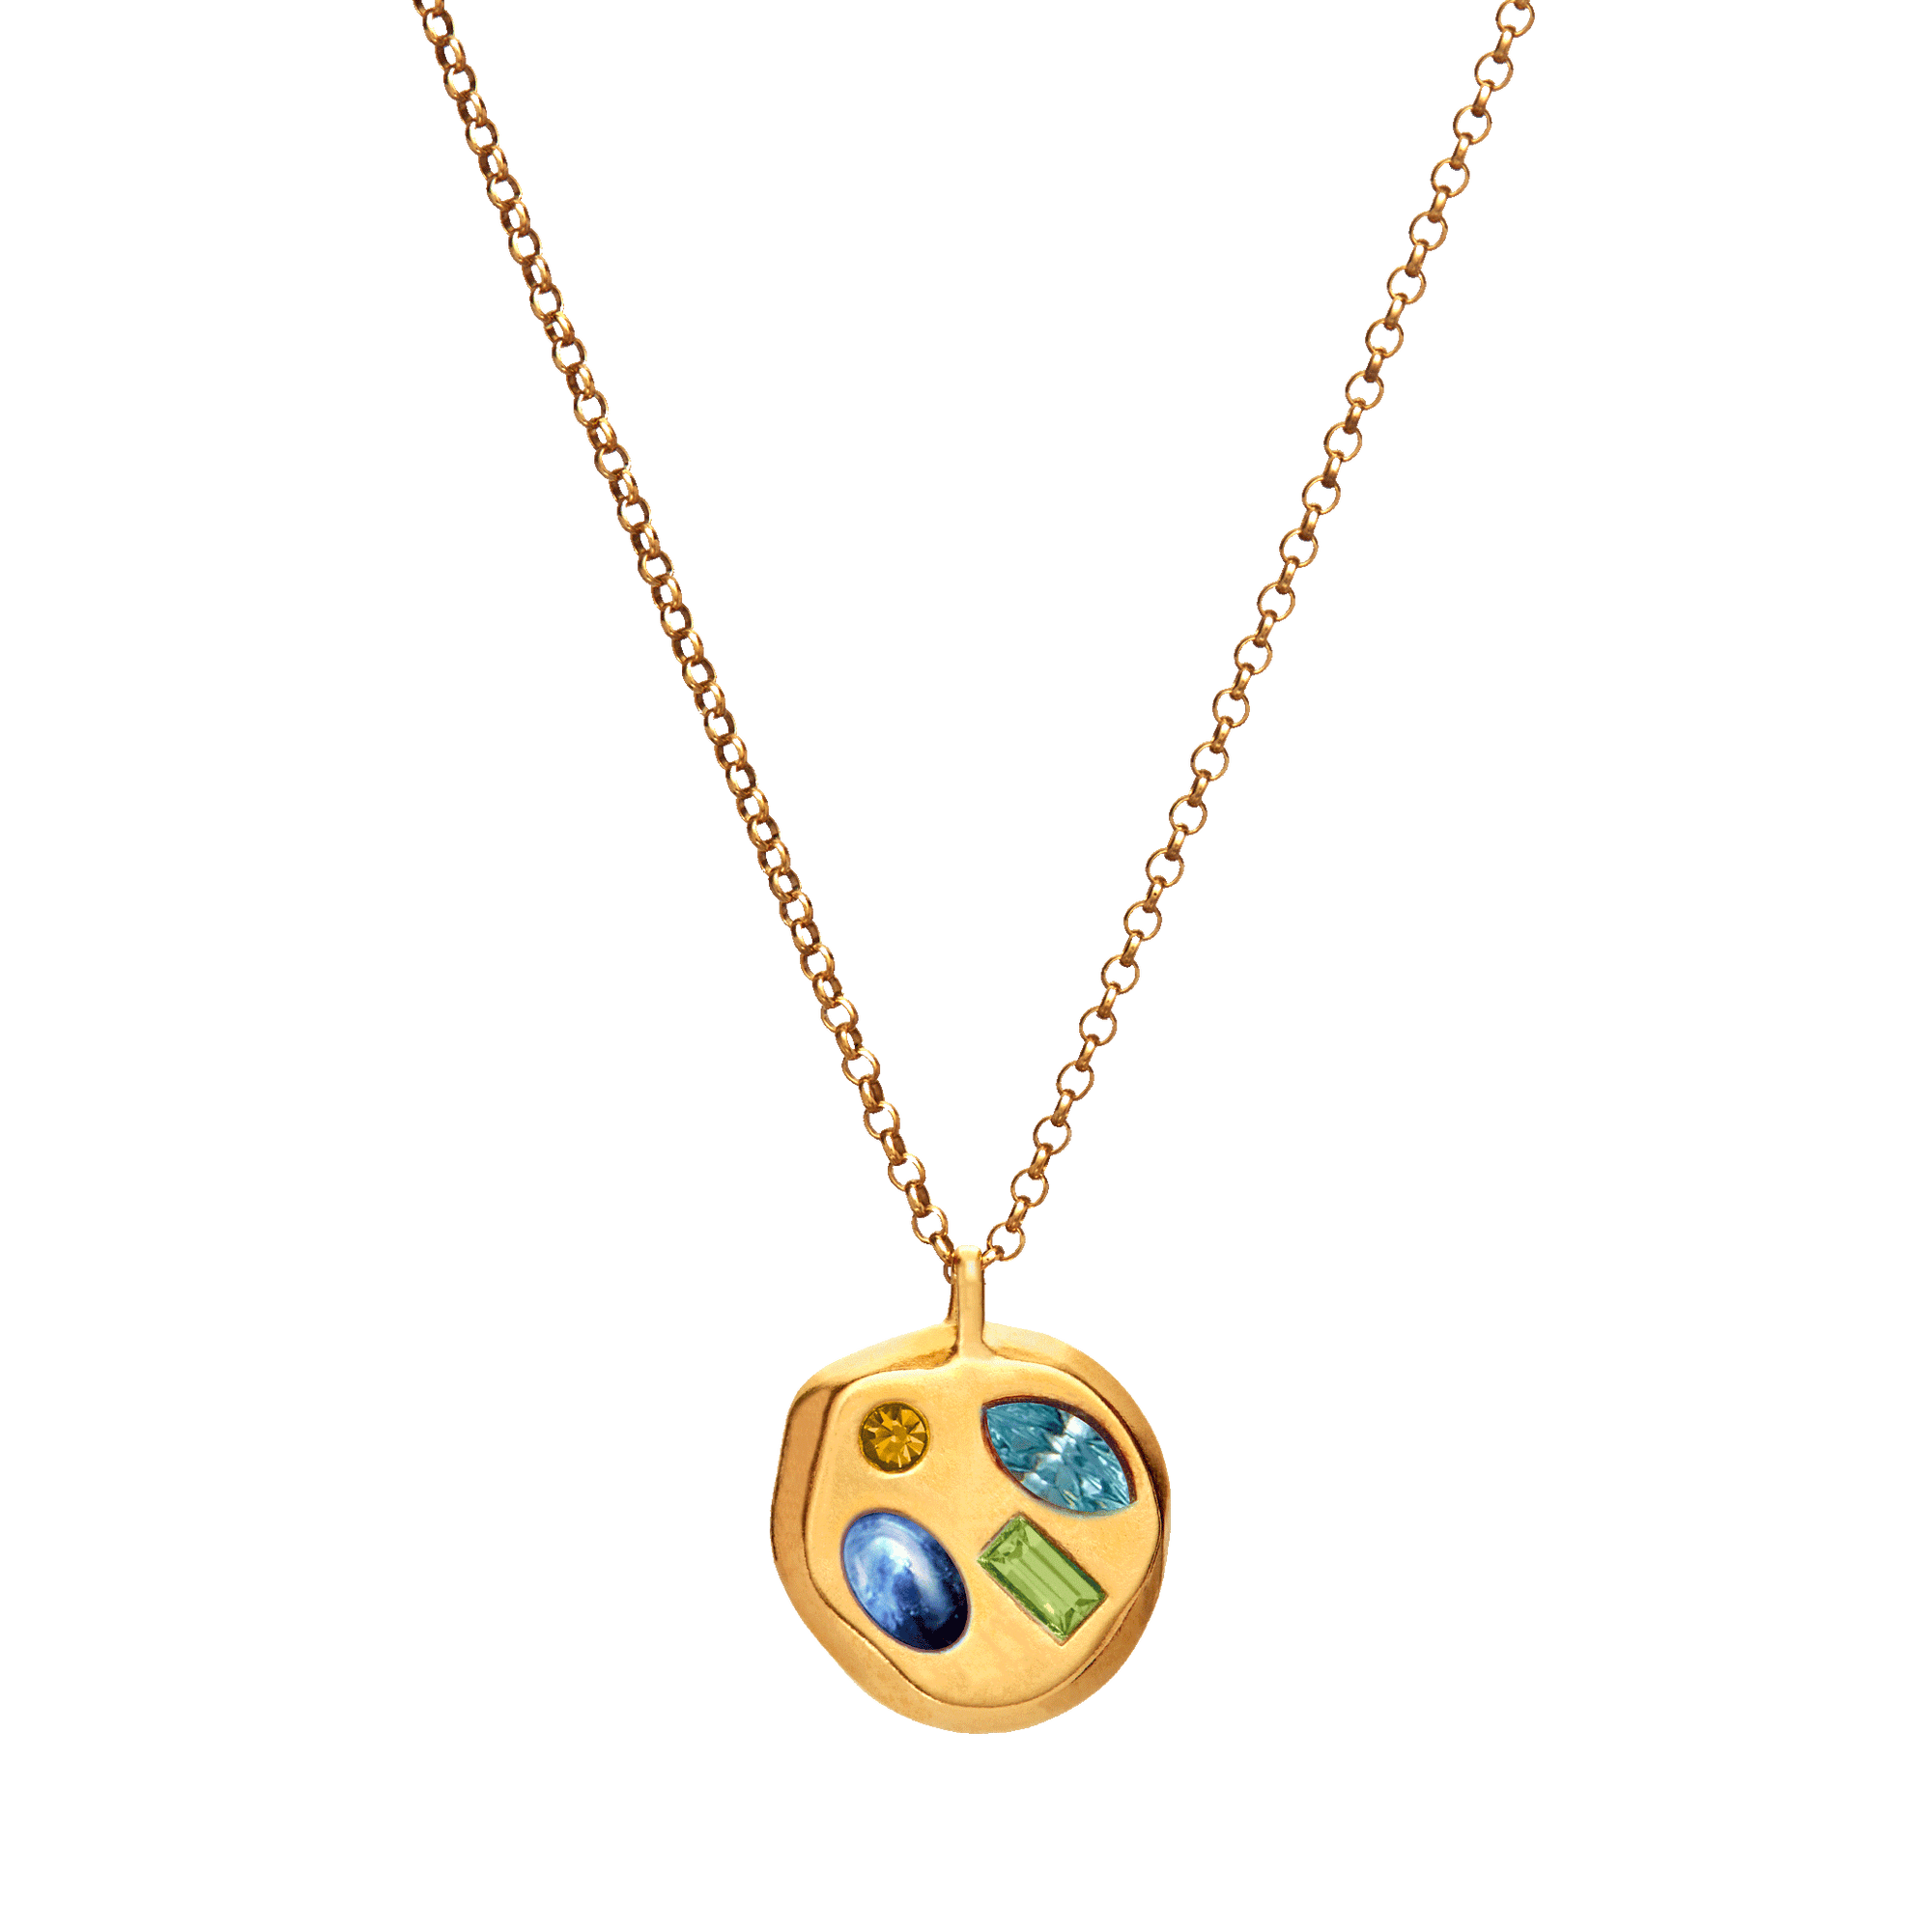 The March Eighteenth Pendant